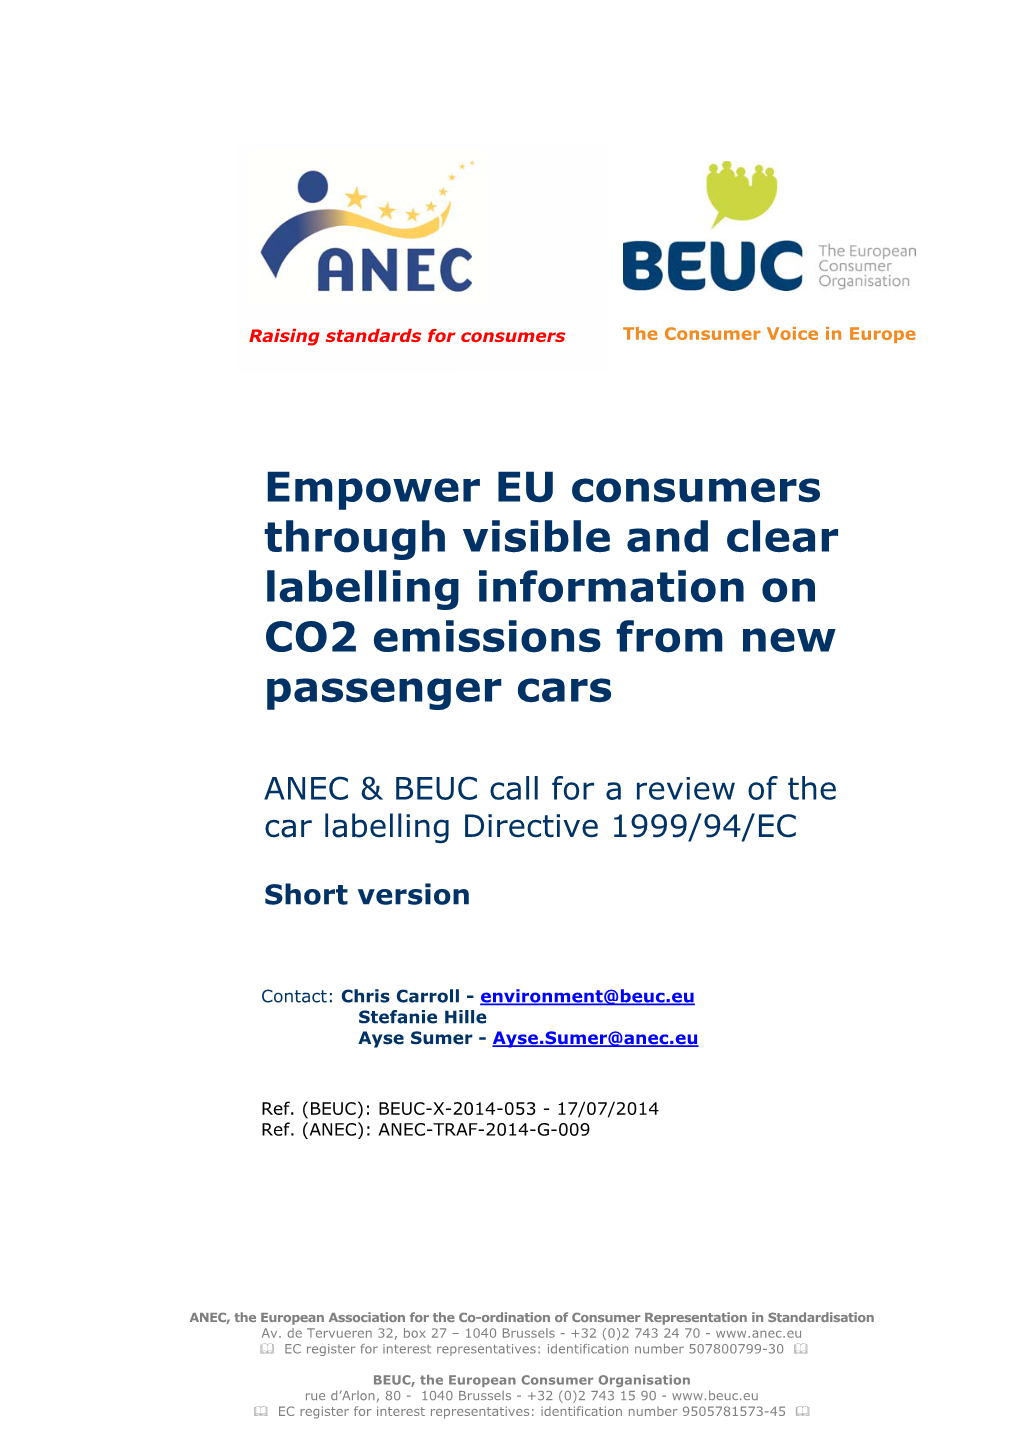 Empower EU Consumers Through Visible and Clear Labelling Information on CO2 Emissions from New Passenger Cars